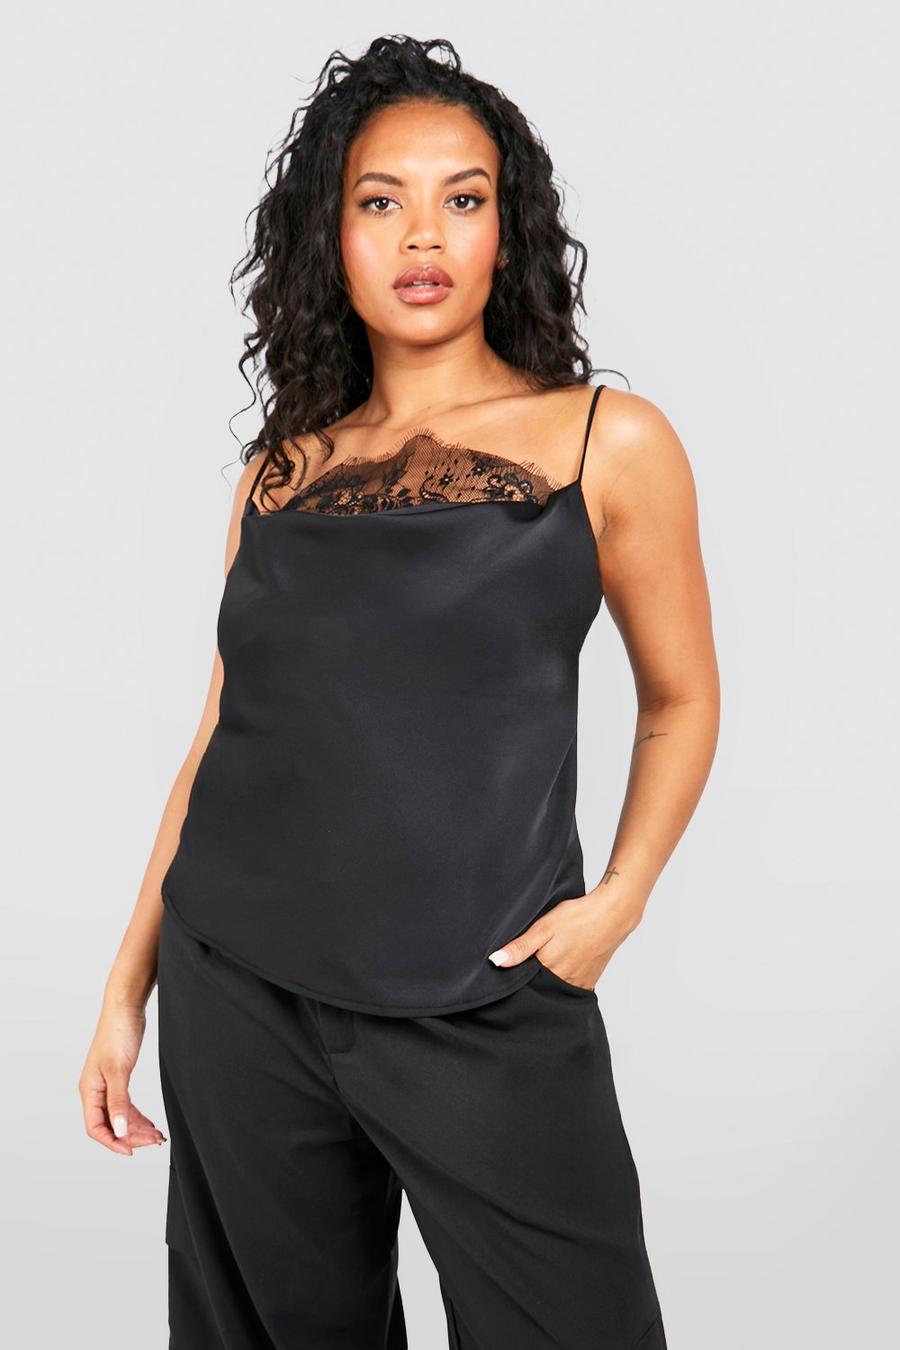 Essential Basic Women's Basic Casual Long Camisole Cami Top Plus Sizes -  Black, 1XL